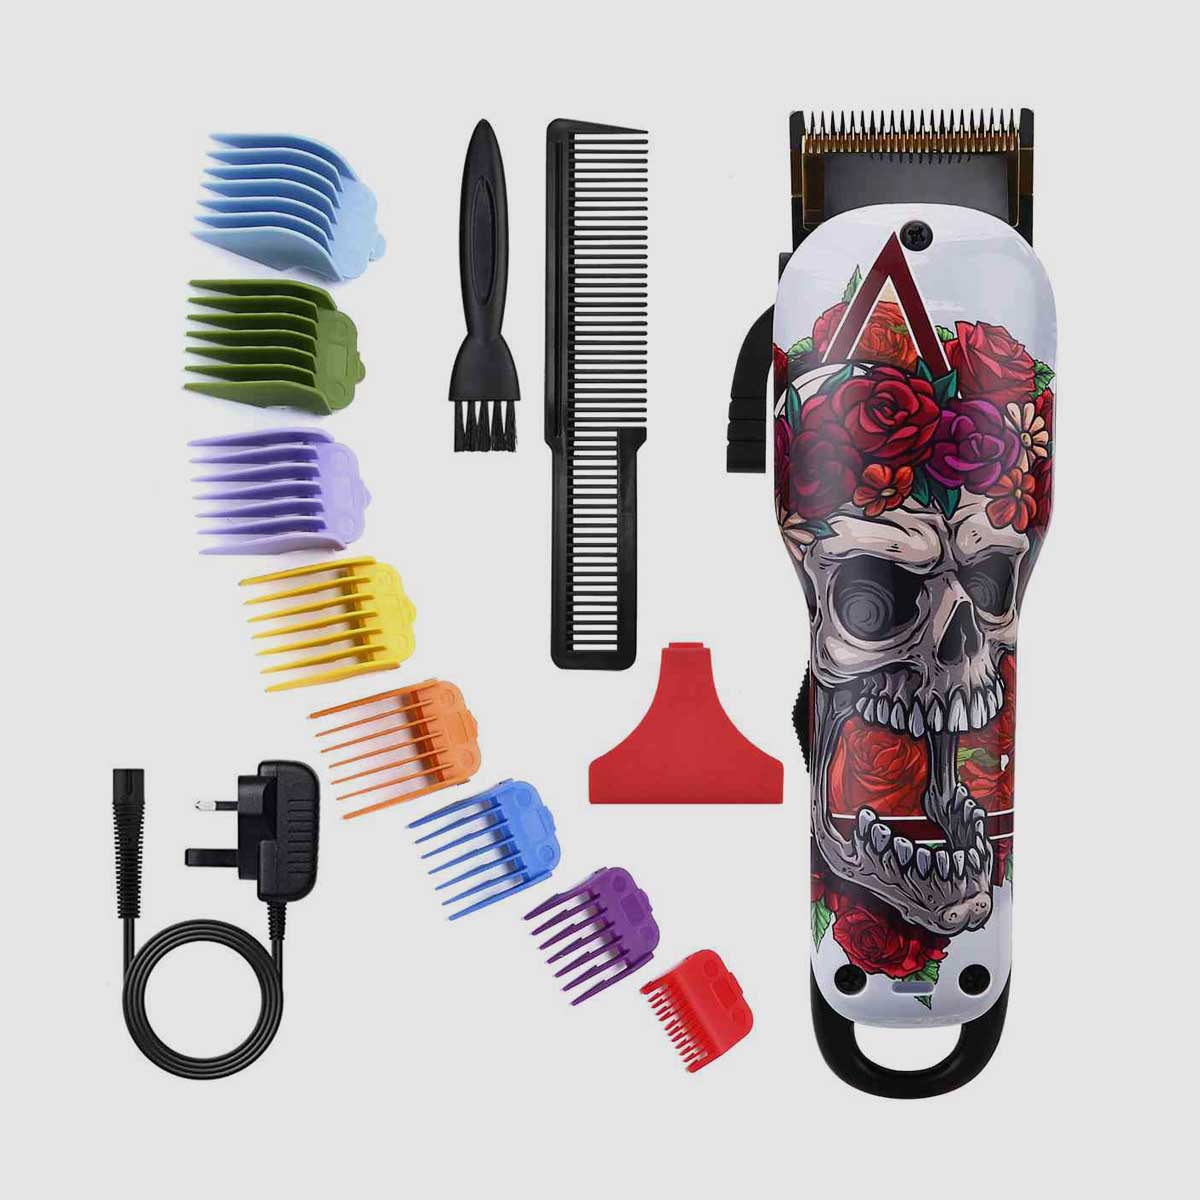 Wireless Hair Grooming Trimmers Set